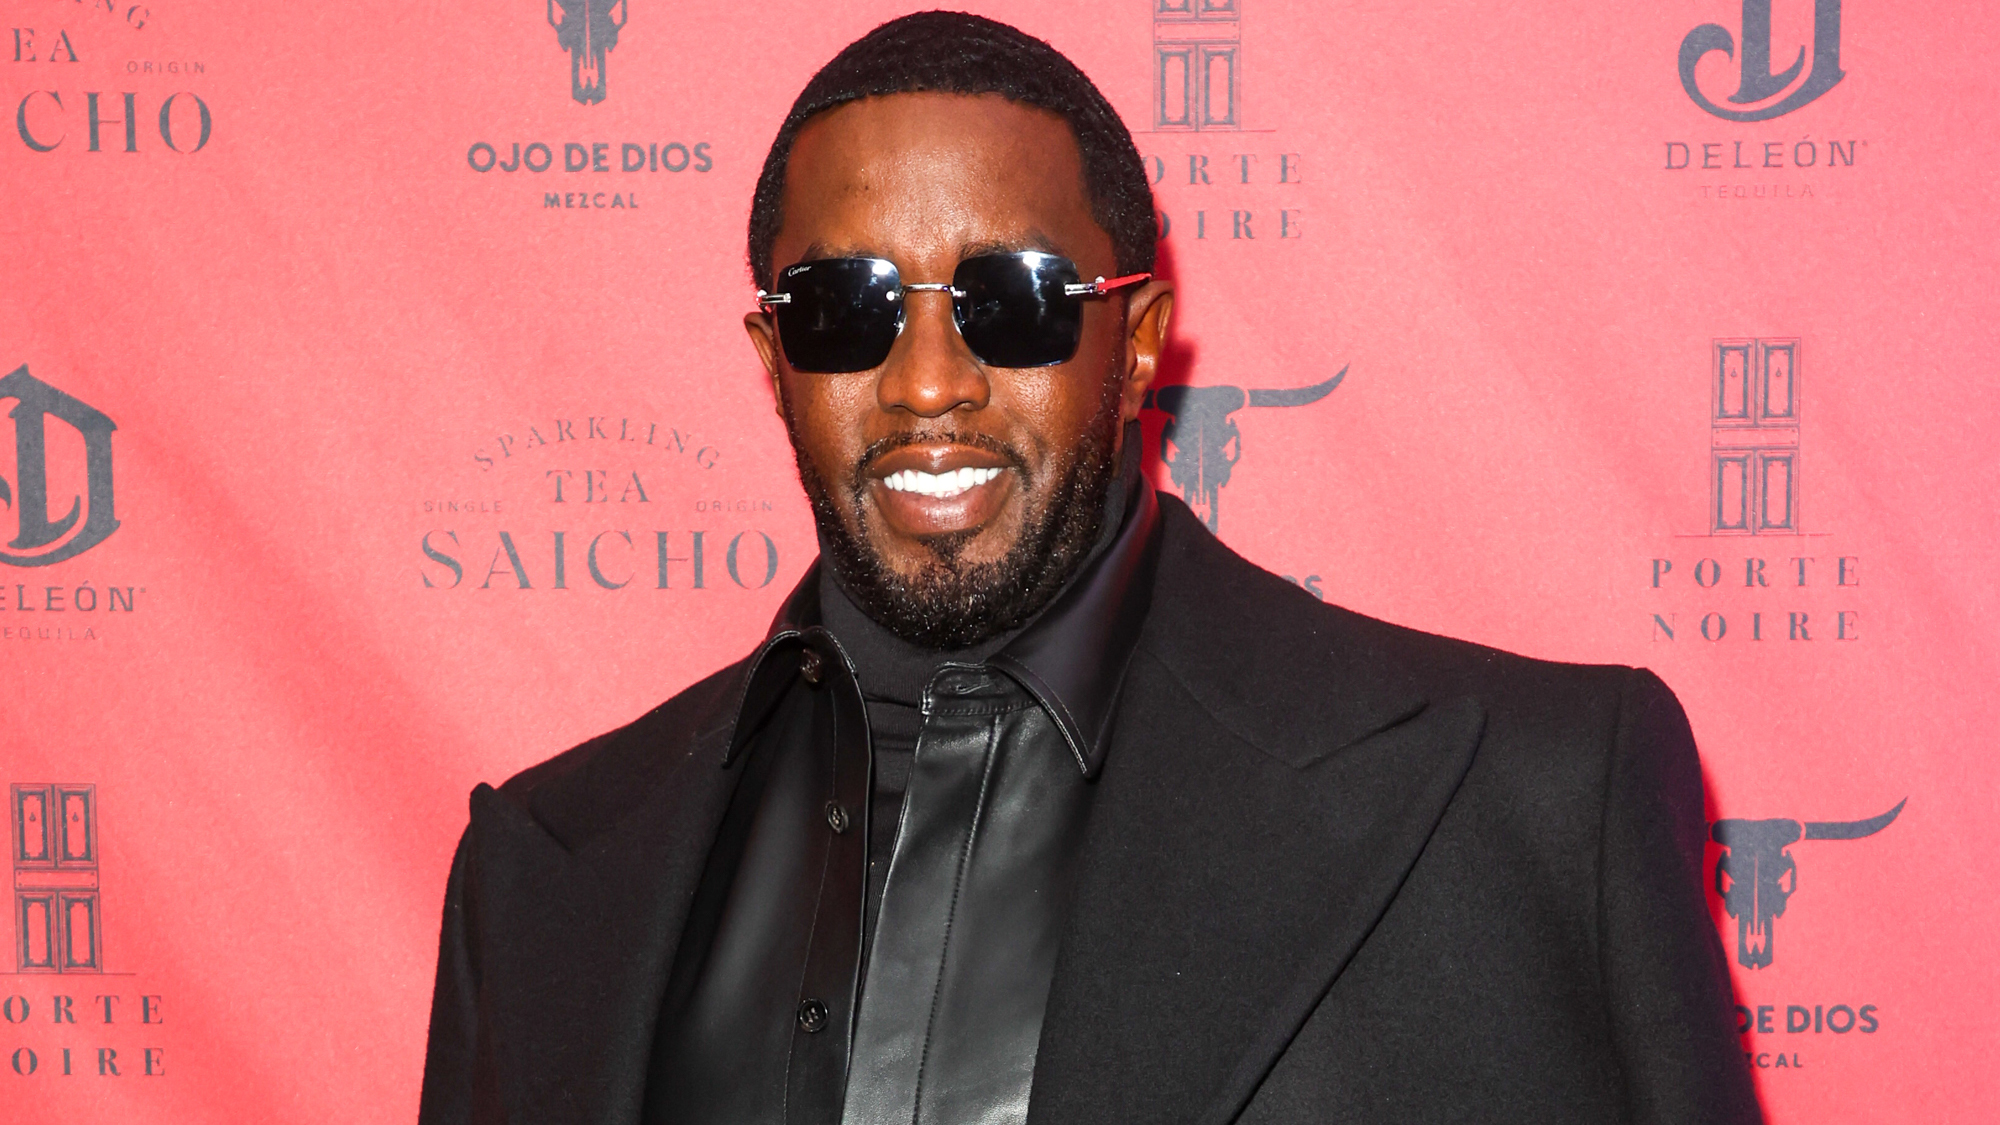 Authorities conduct searches at residences belonging to Sean ‘Diddy’ Combs following federal law enforcement operation